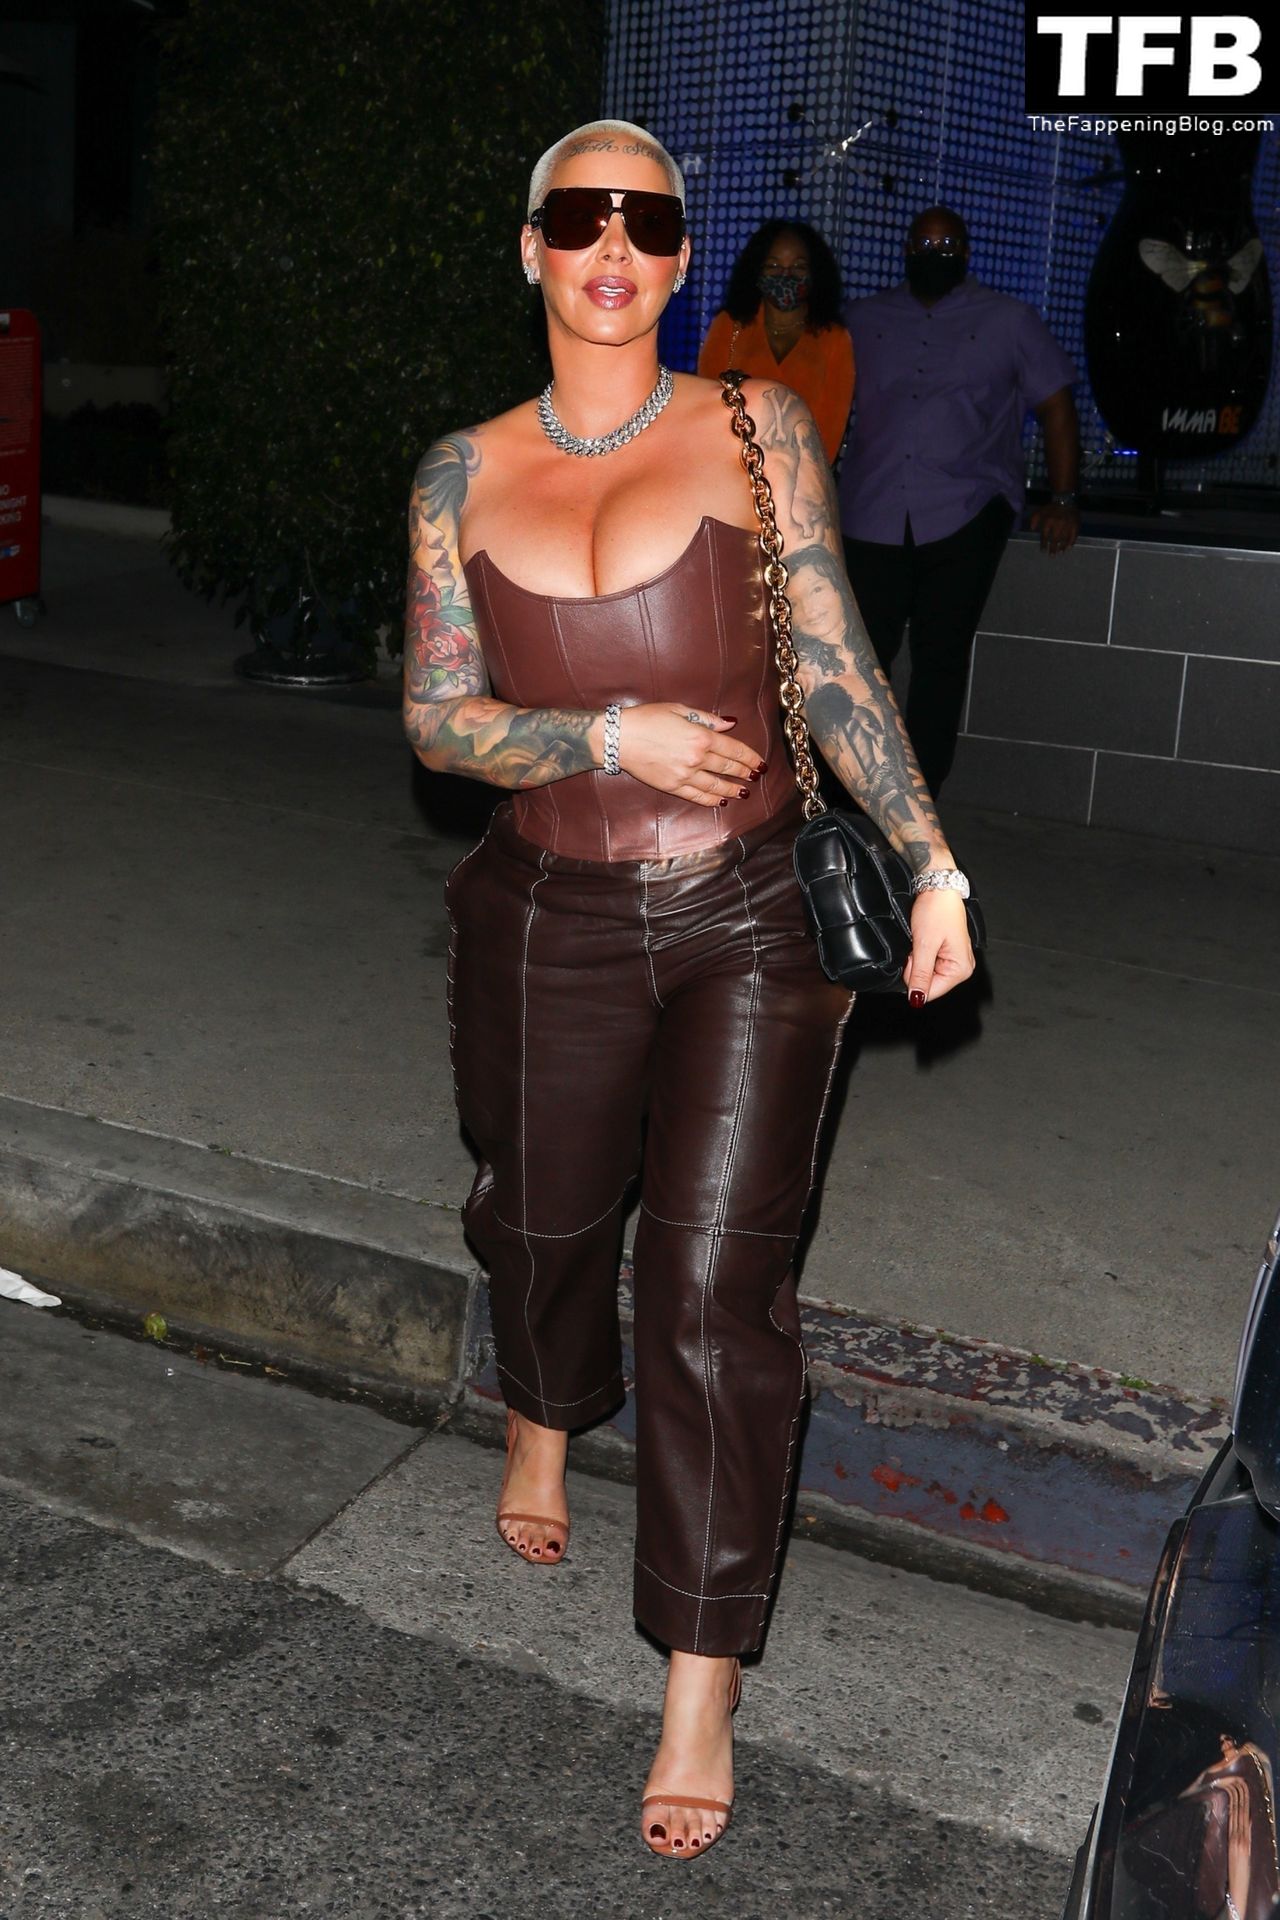 Amber-Rose-Sexy-The-Fappening-Blog-28.jpg